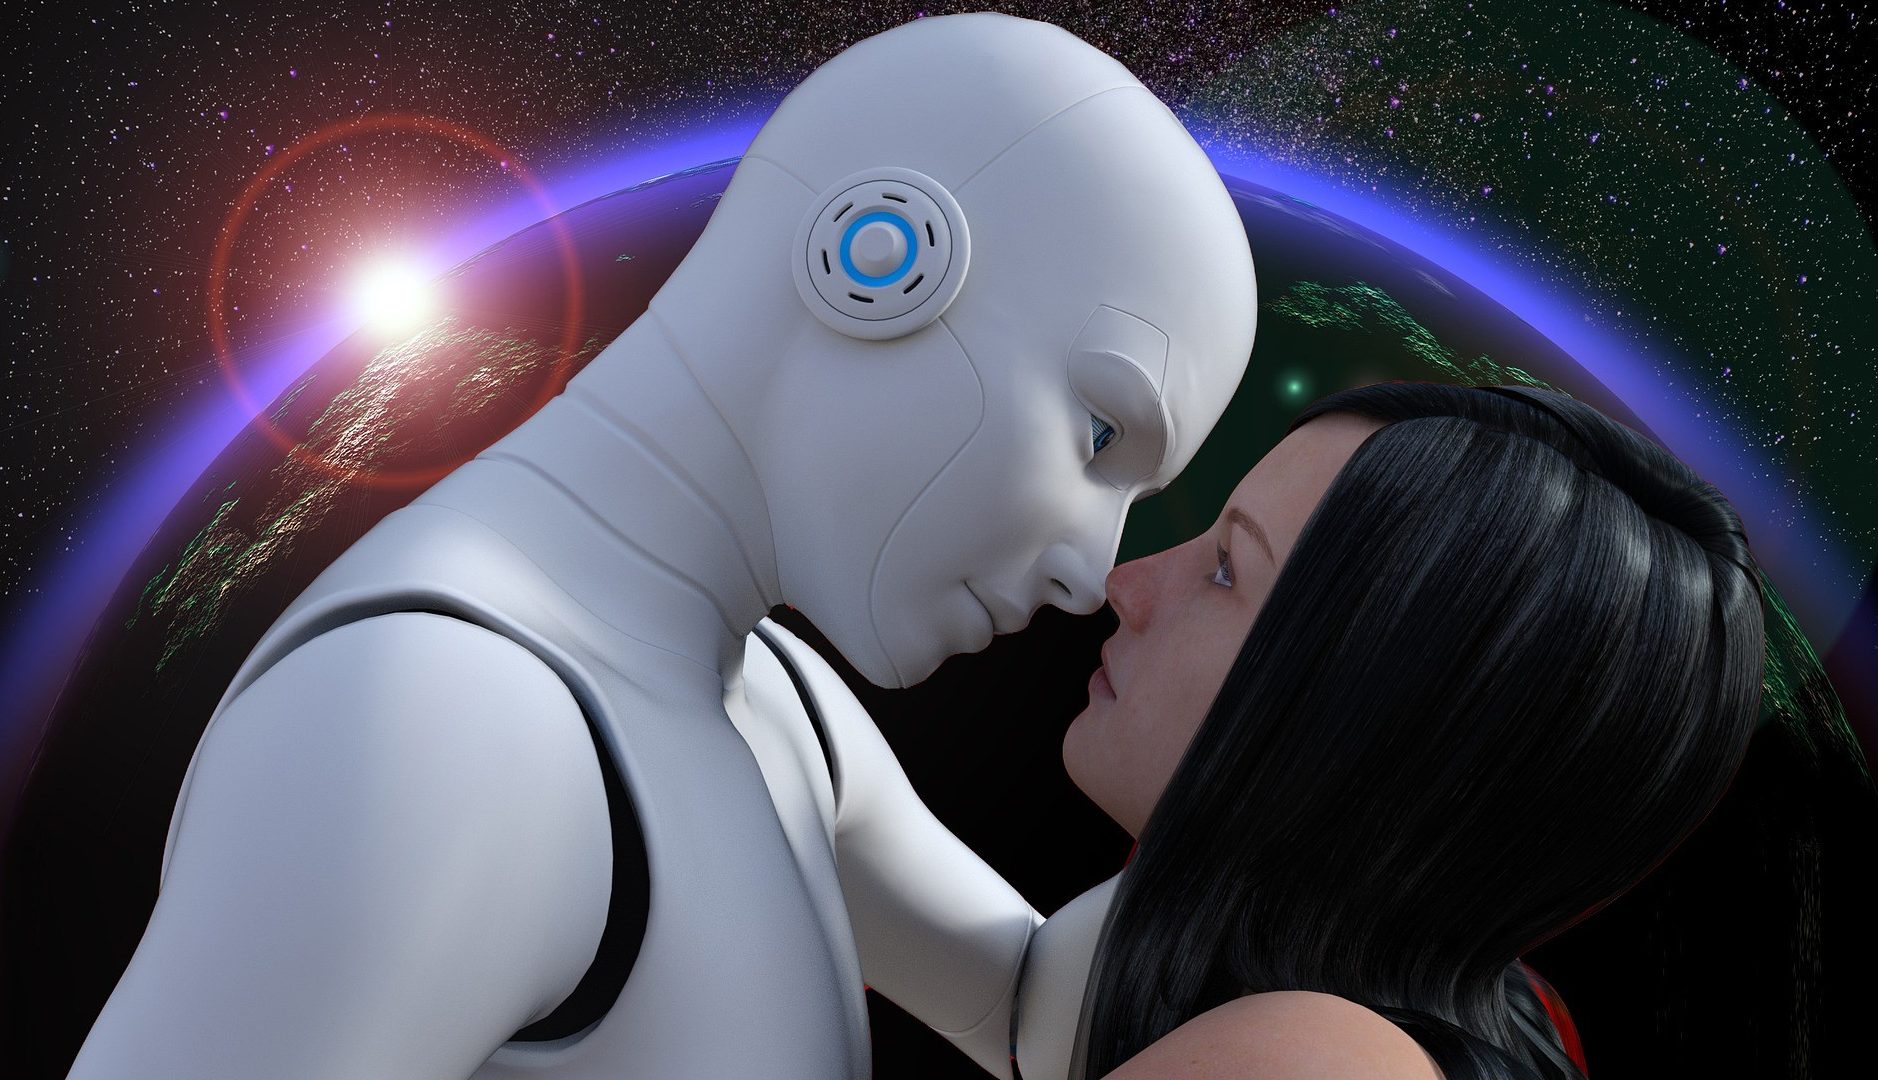 Erotophilia and Sexual Sensation–seeking Are Good Predictors of Engagement with Sex Robots